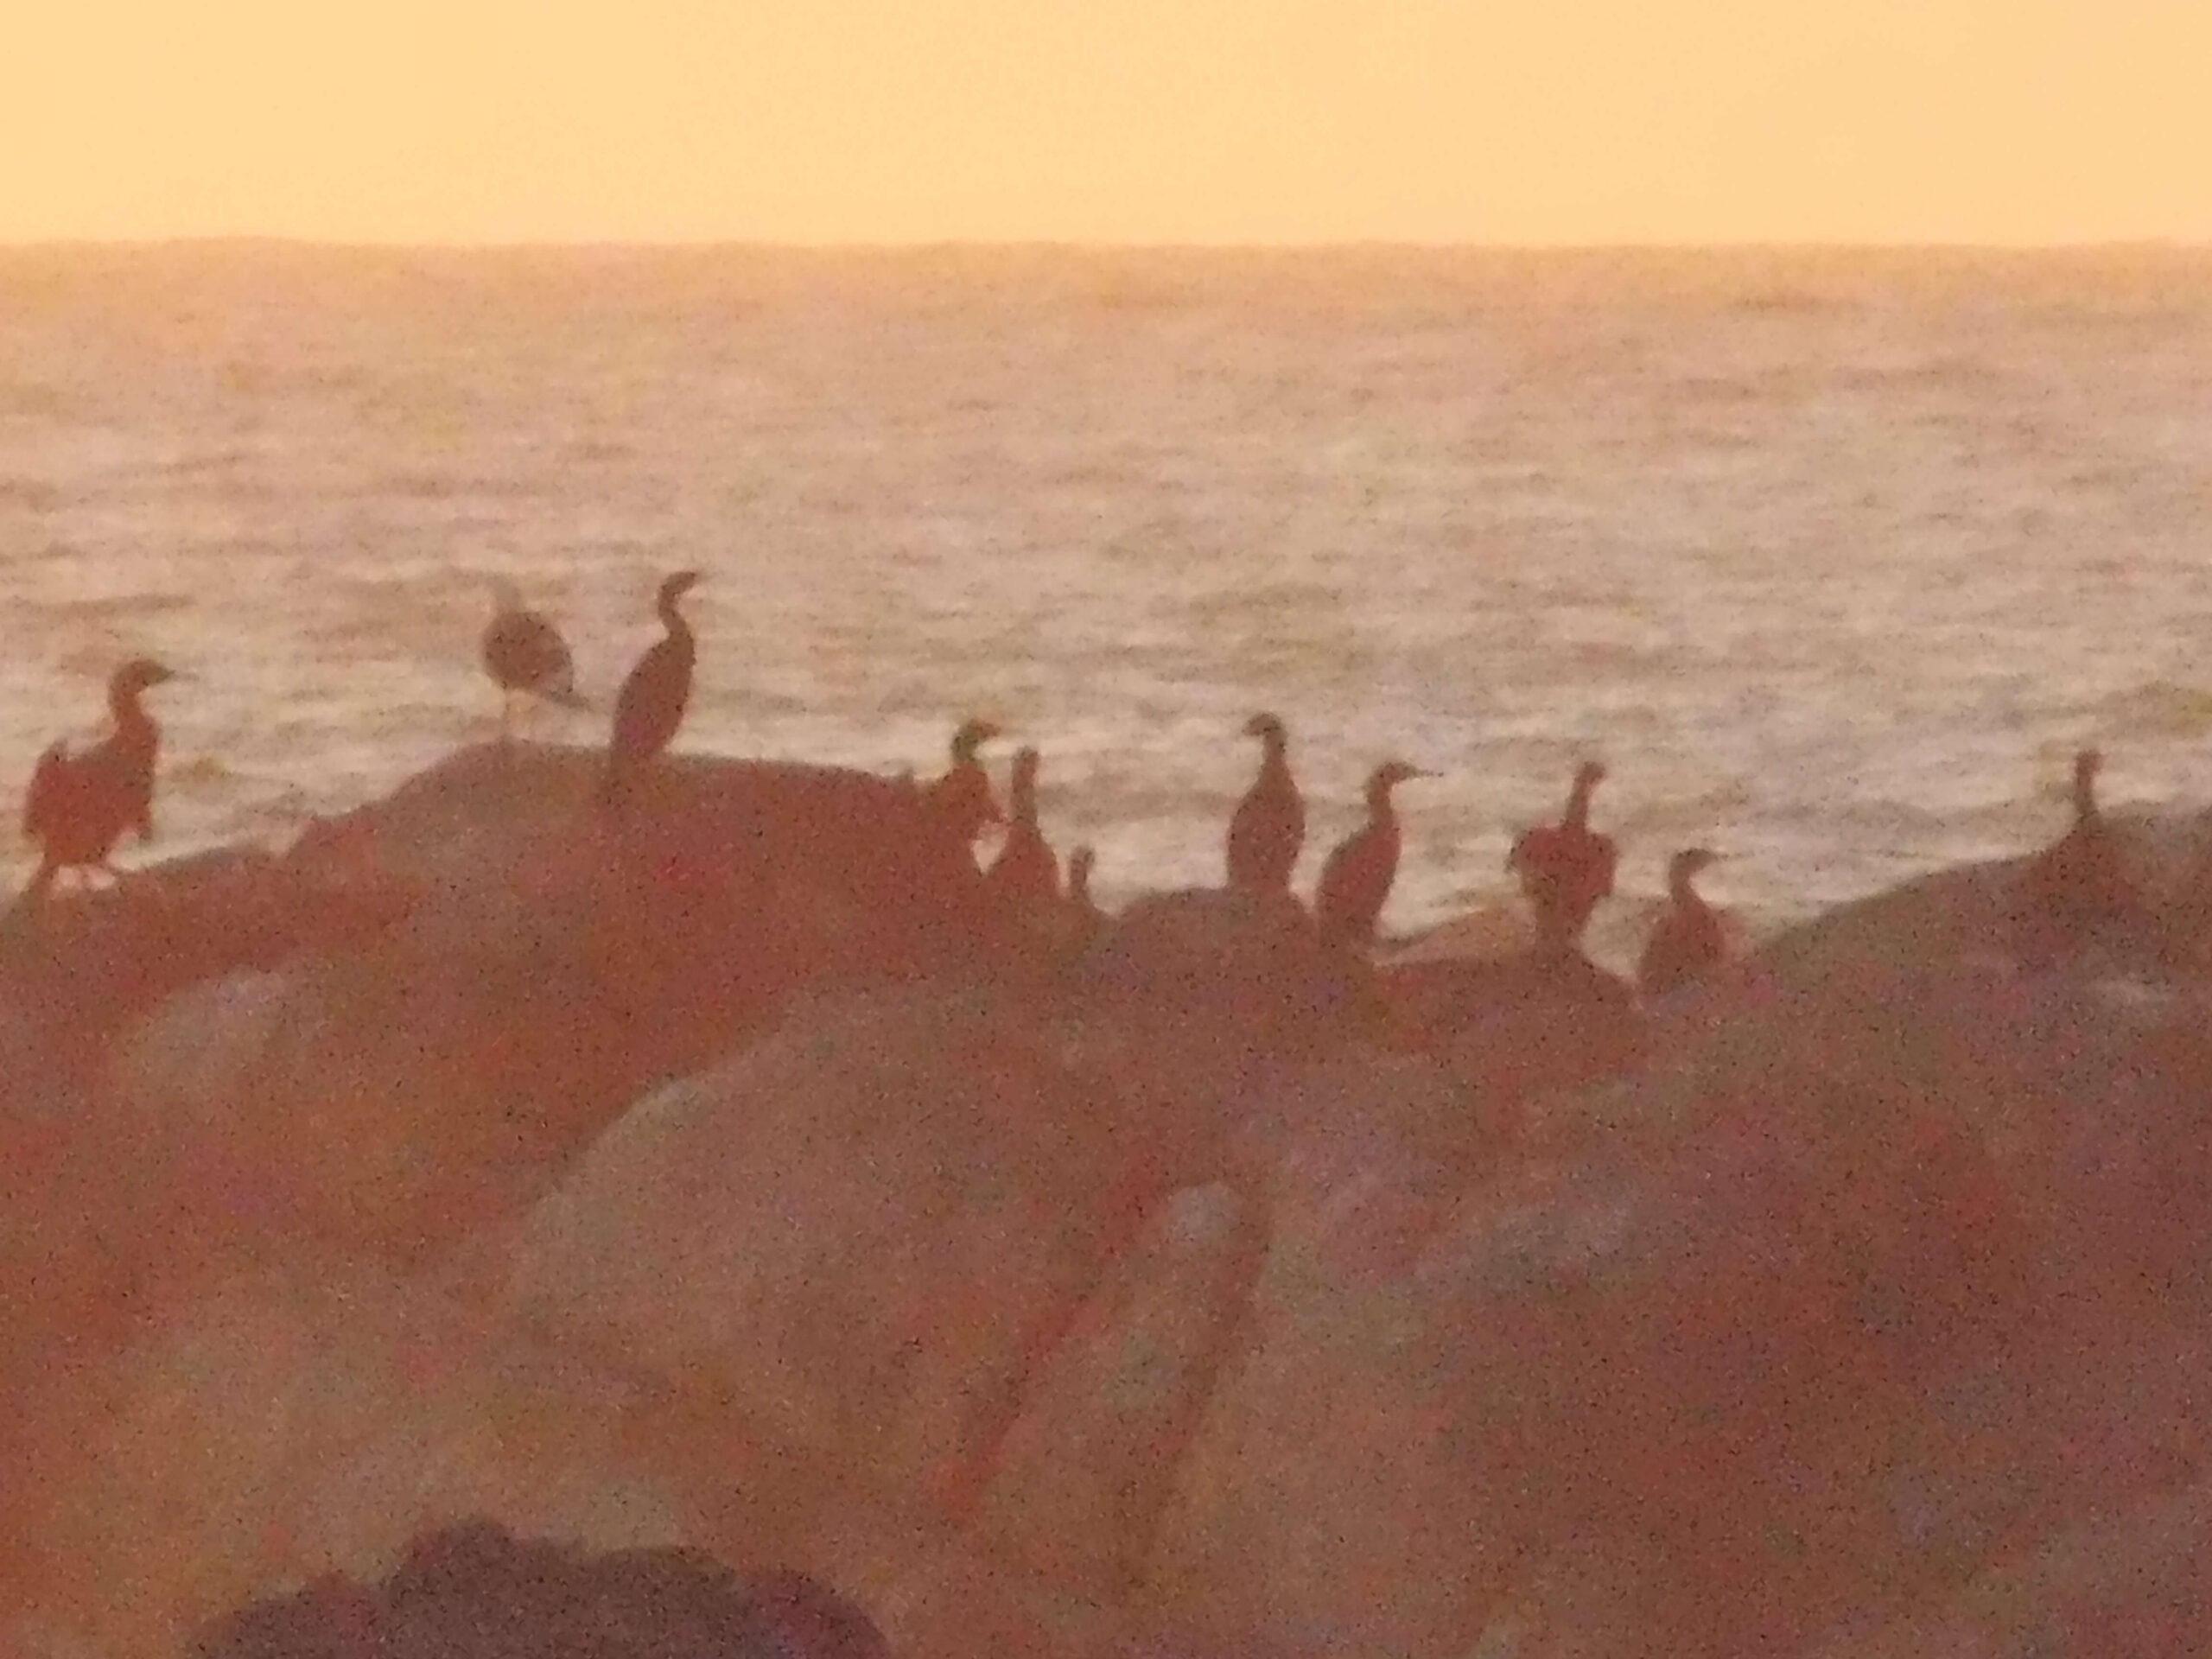 a group of feathery beings enjoy the sunset together